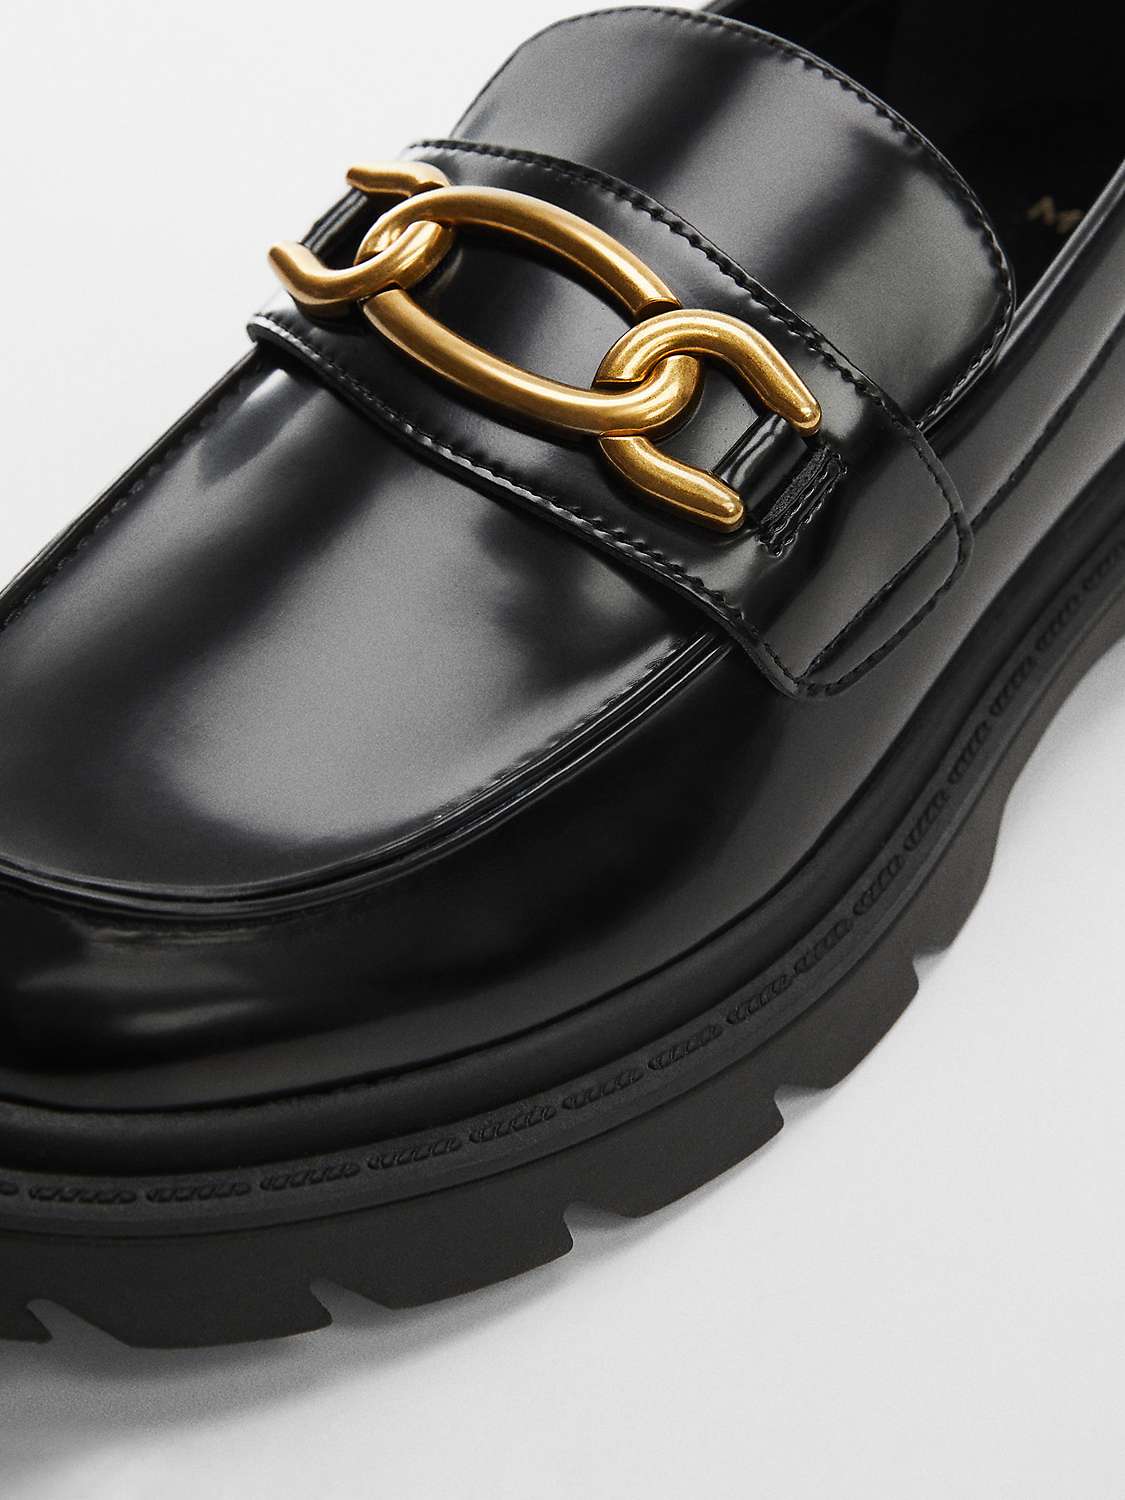 Buy Mango Funki Faux Leather Chain Loafers, Black Online at johnlewis.com